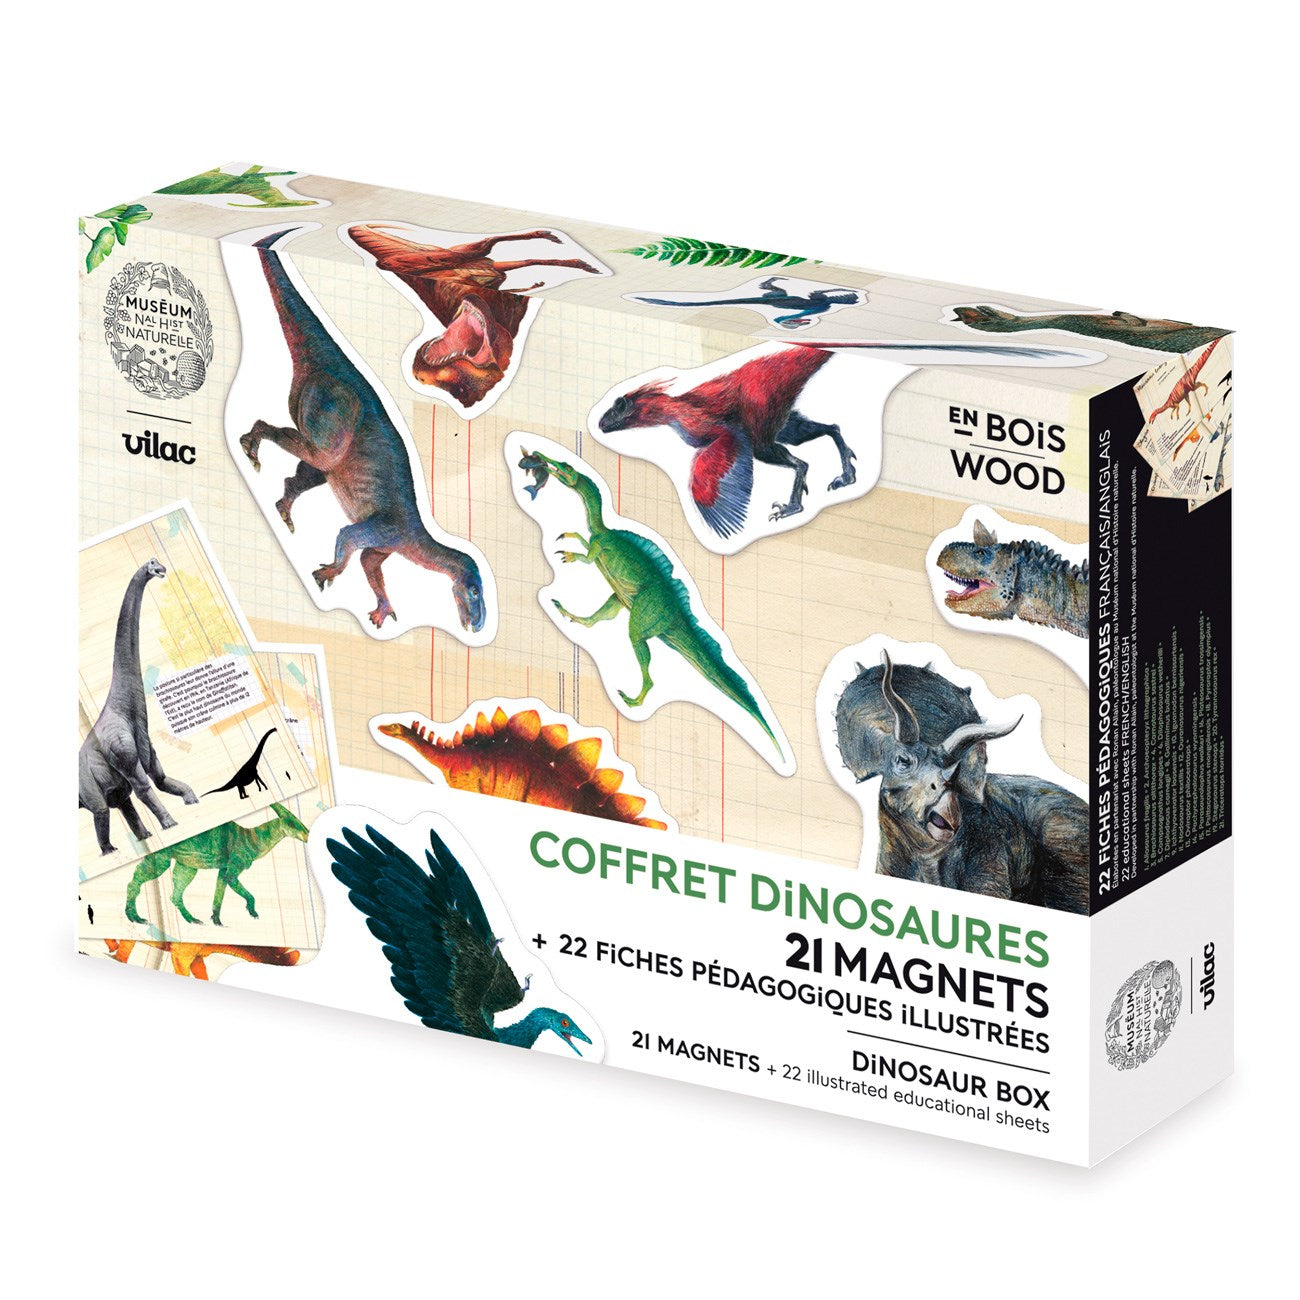 Vilac Magnets 21 pcs Dinosaurs from the Natural History Museum